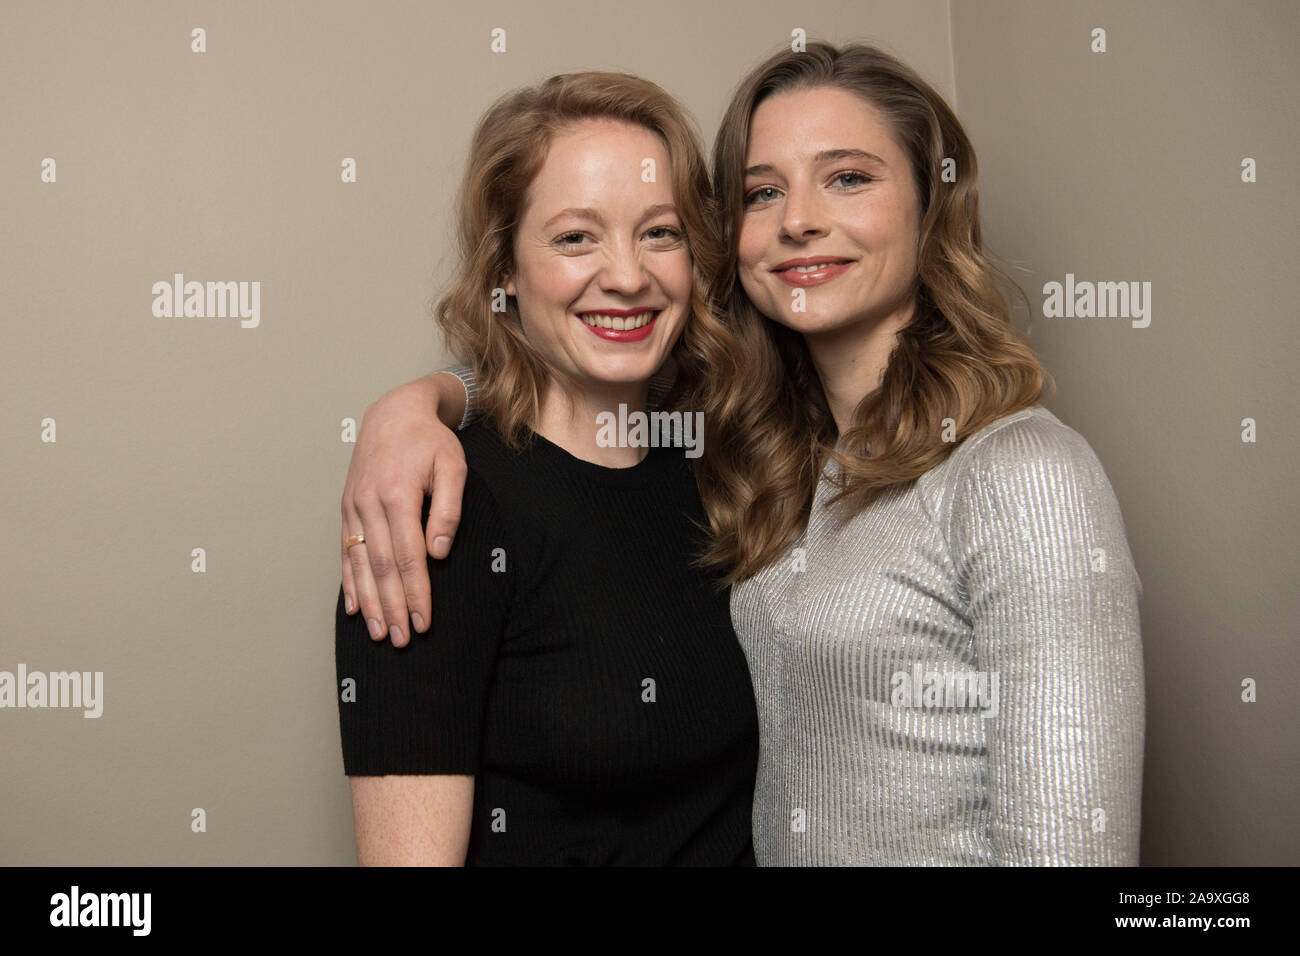 Berlin, Germany. 18th Nov, 2019. The actresses Leonie Benesch (l) and Svenja Jung at an interview appointment on the occasion of the Netflix series 'Time of Secrets'. Credit: Jörg Carstensen/dpa/Alamy Live News Stock Photo